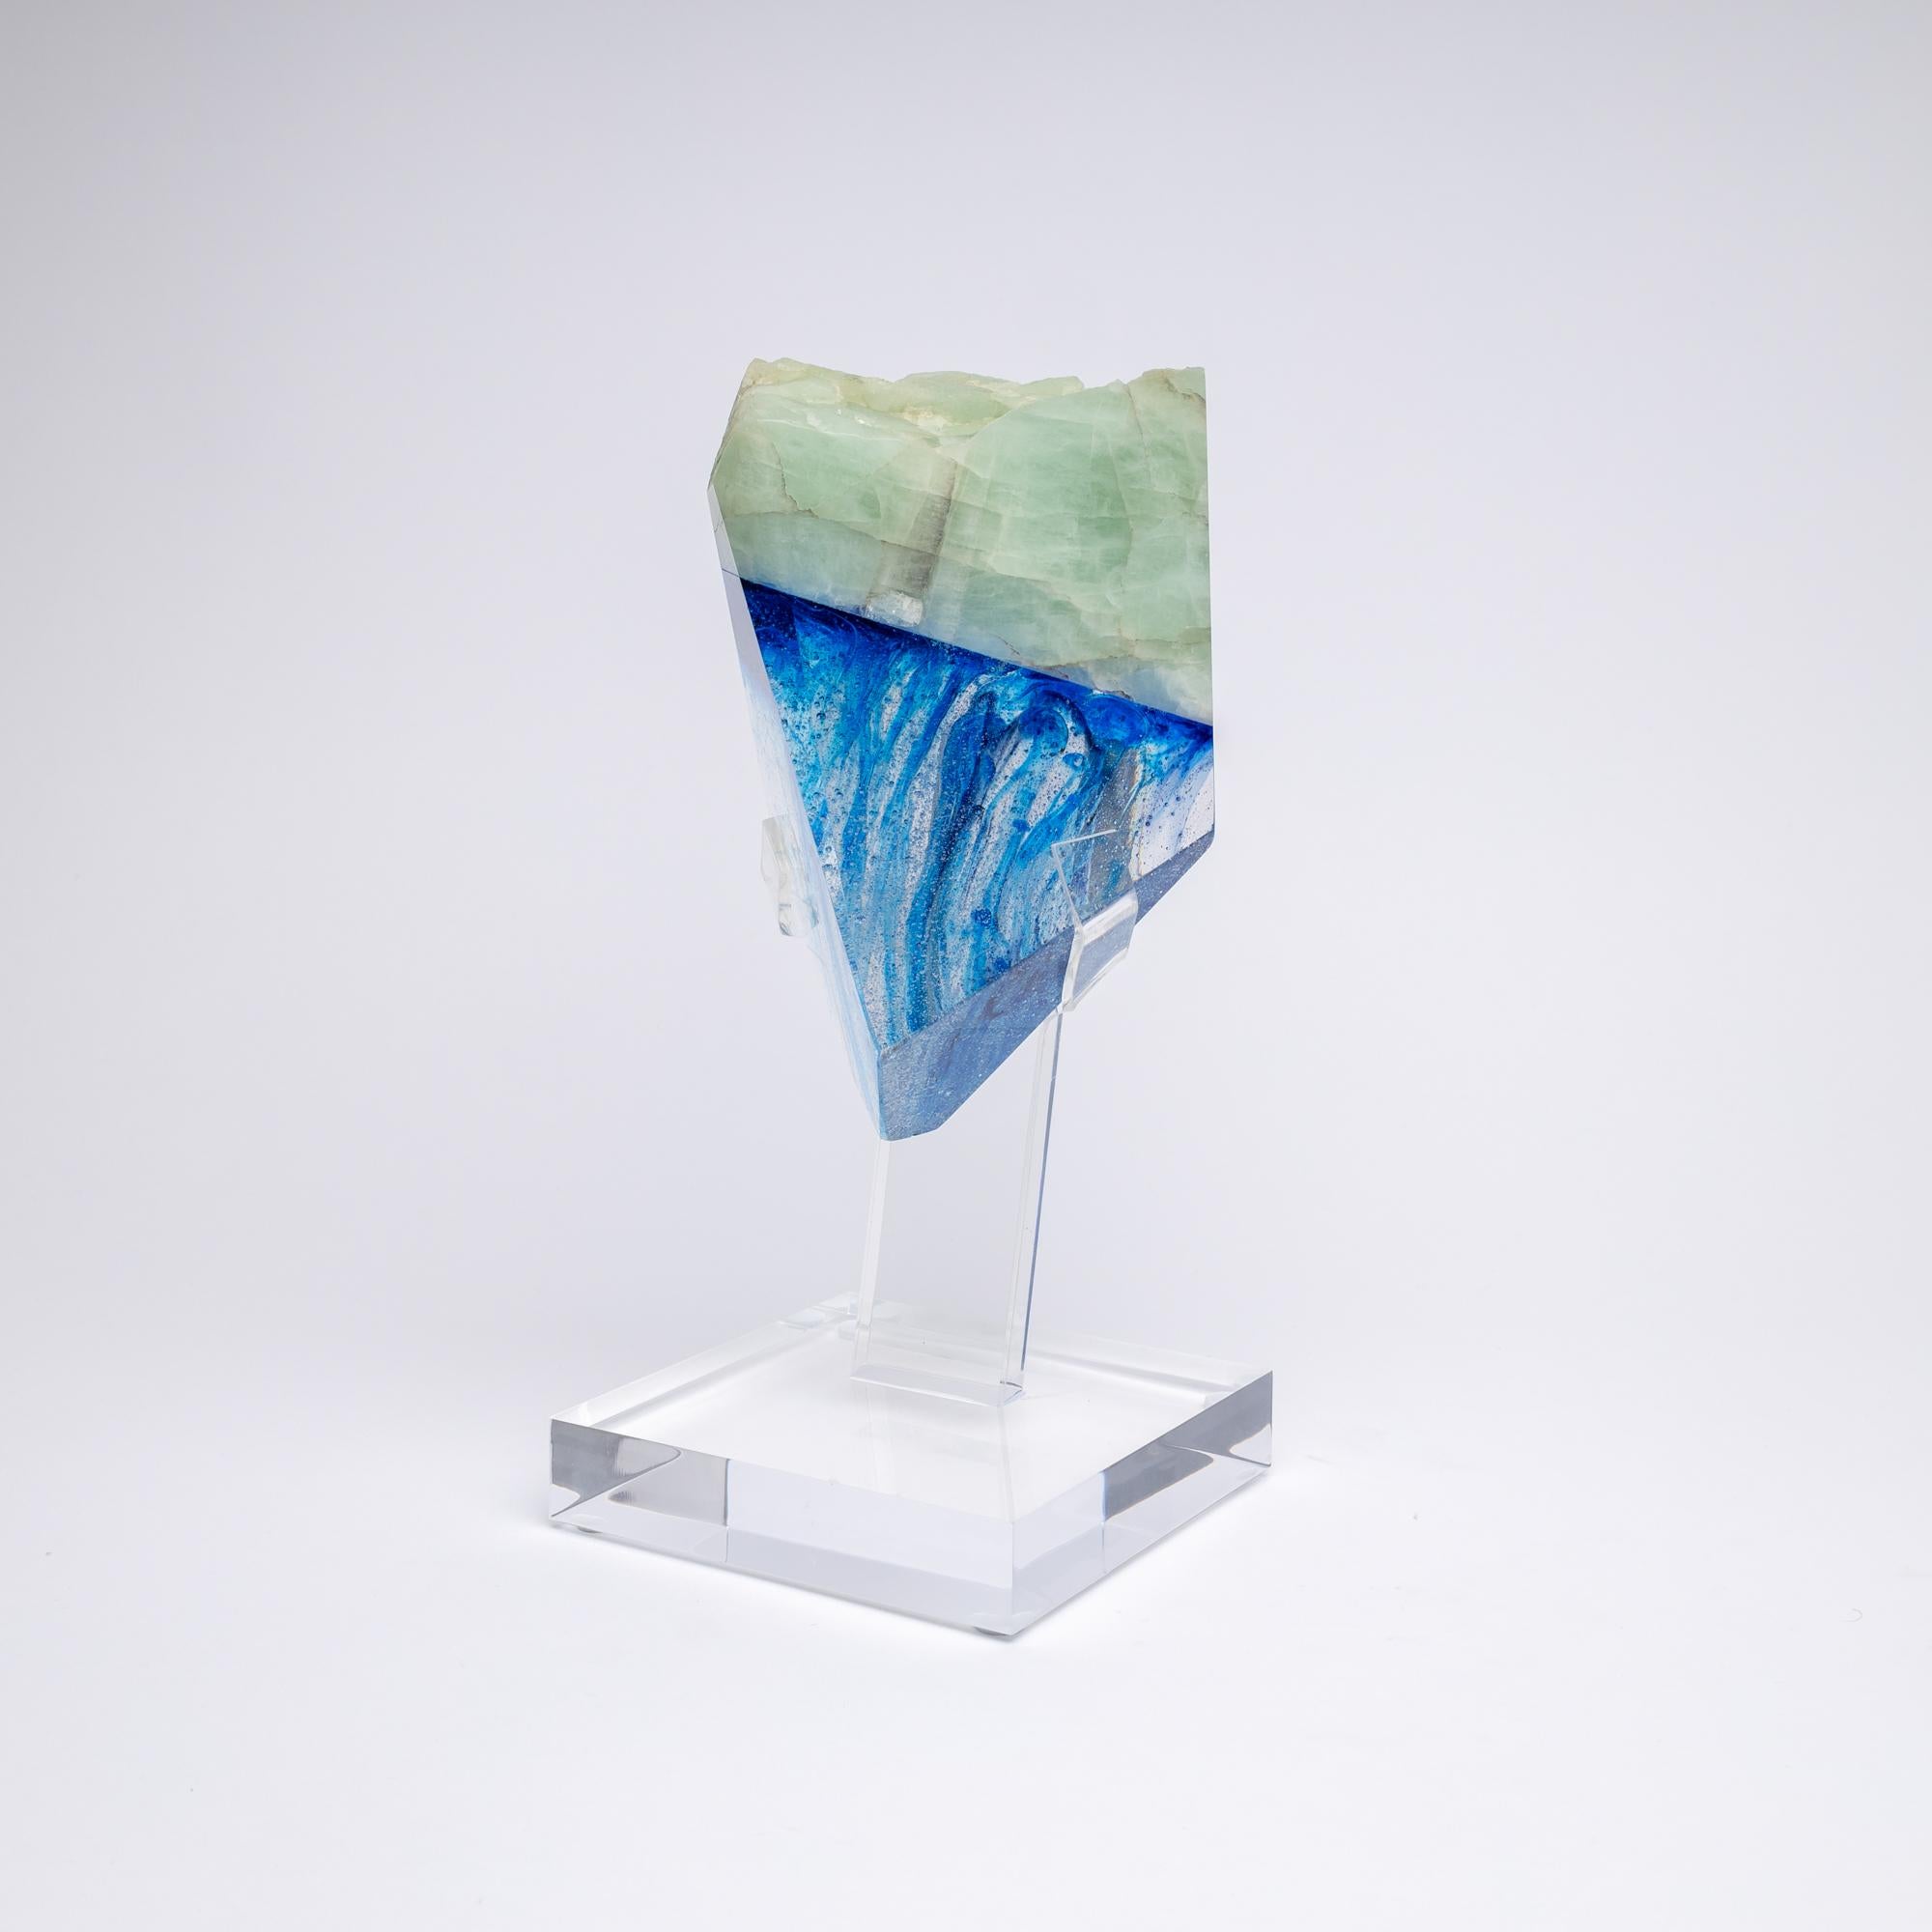 Mexican Brazilian Aquamarine and Blue Hues Organic Faceted Glass Fusion Sculpture For Sale